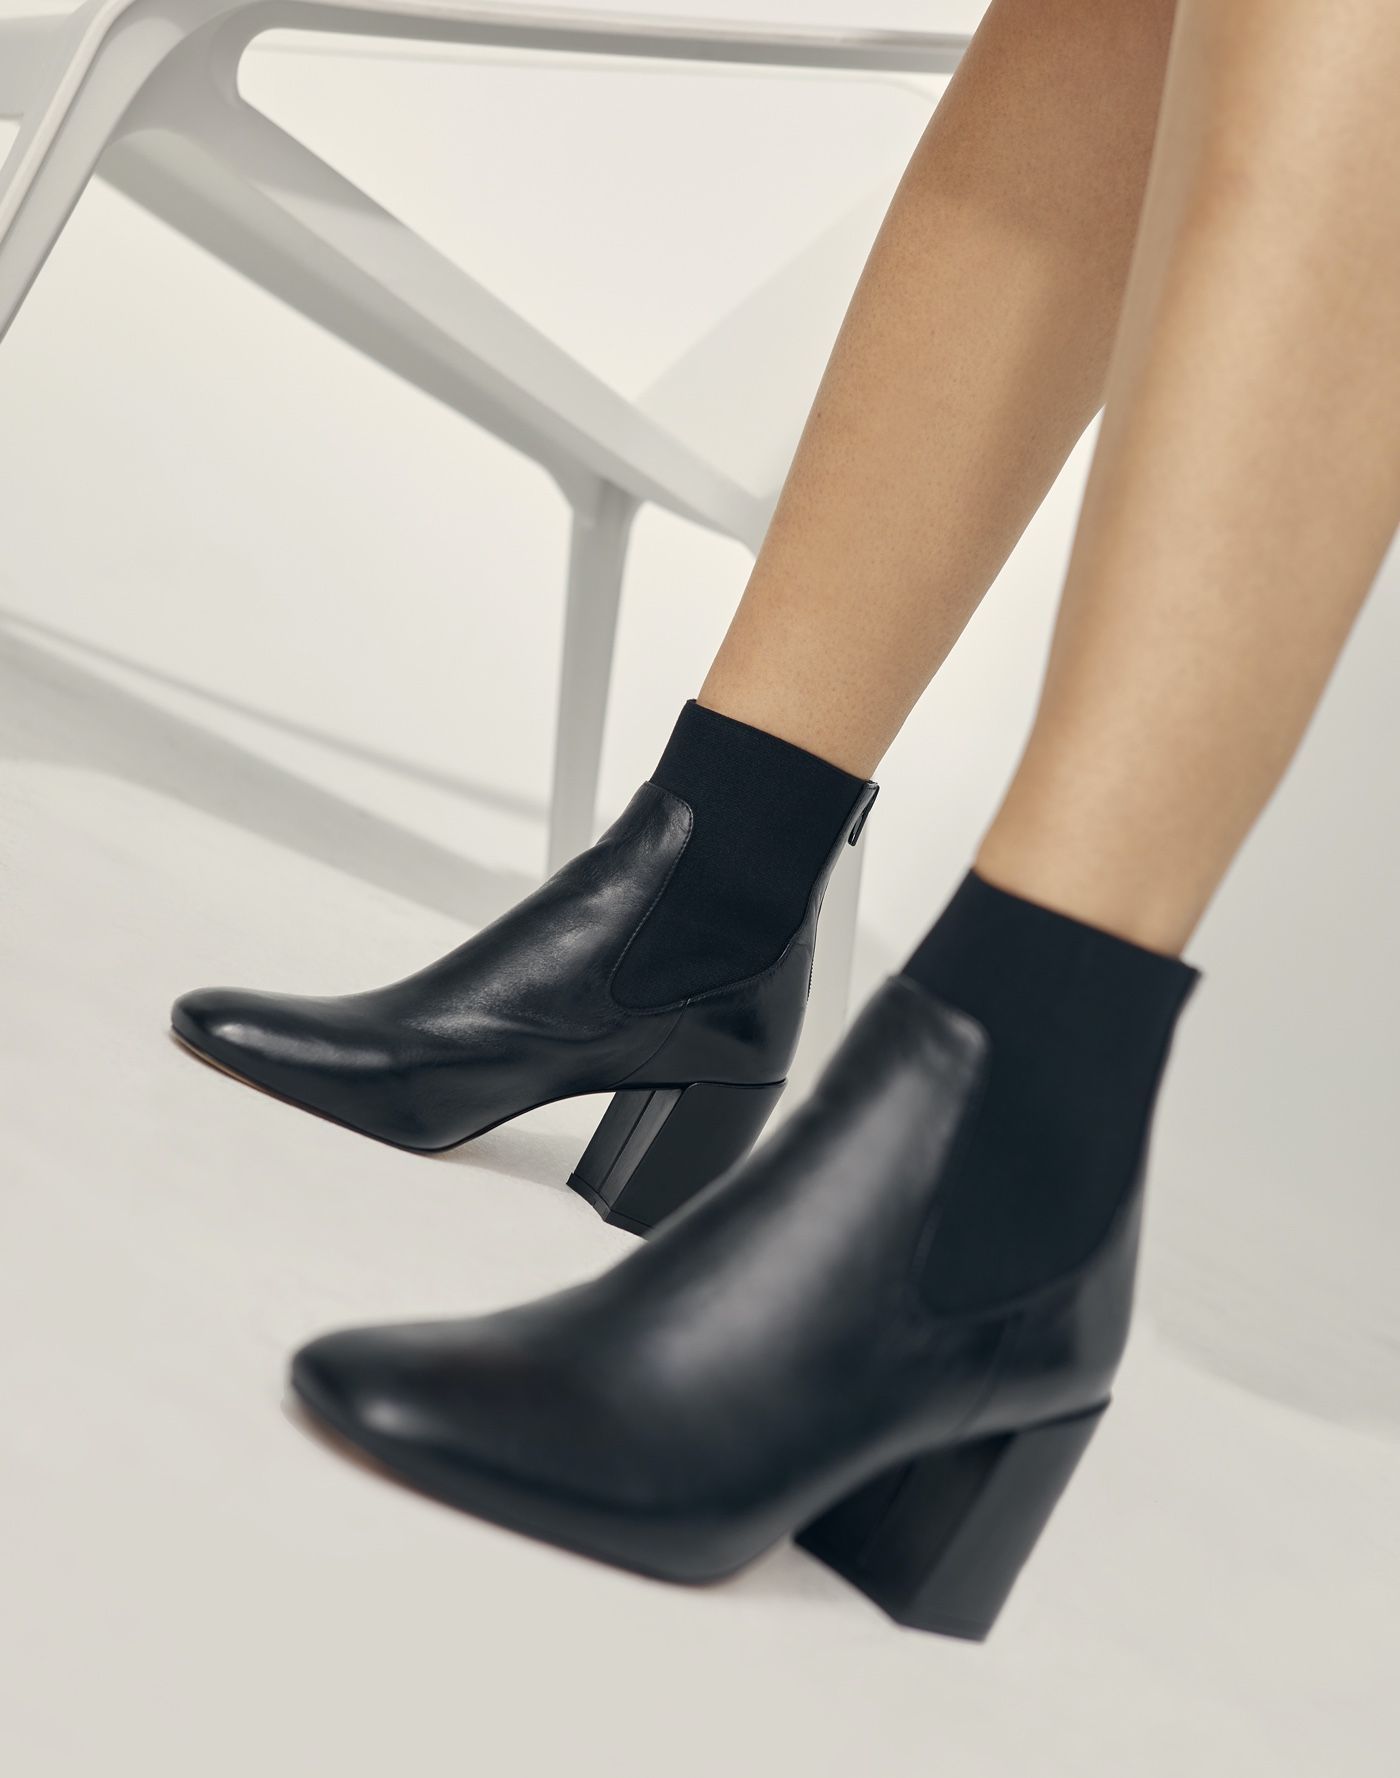 women's boots with heels on sale